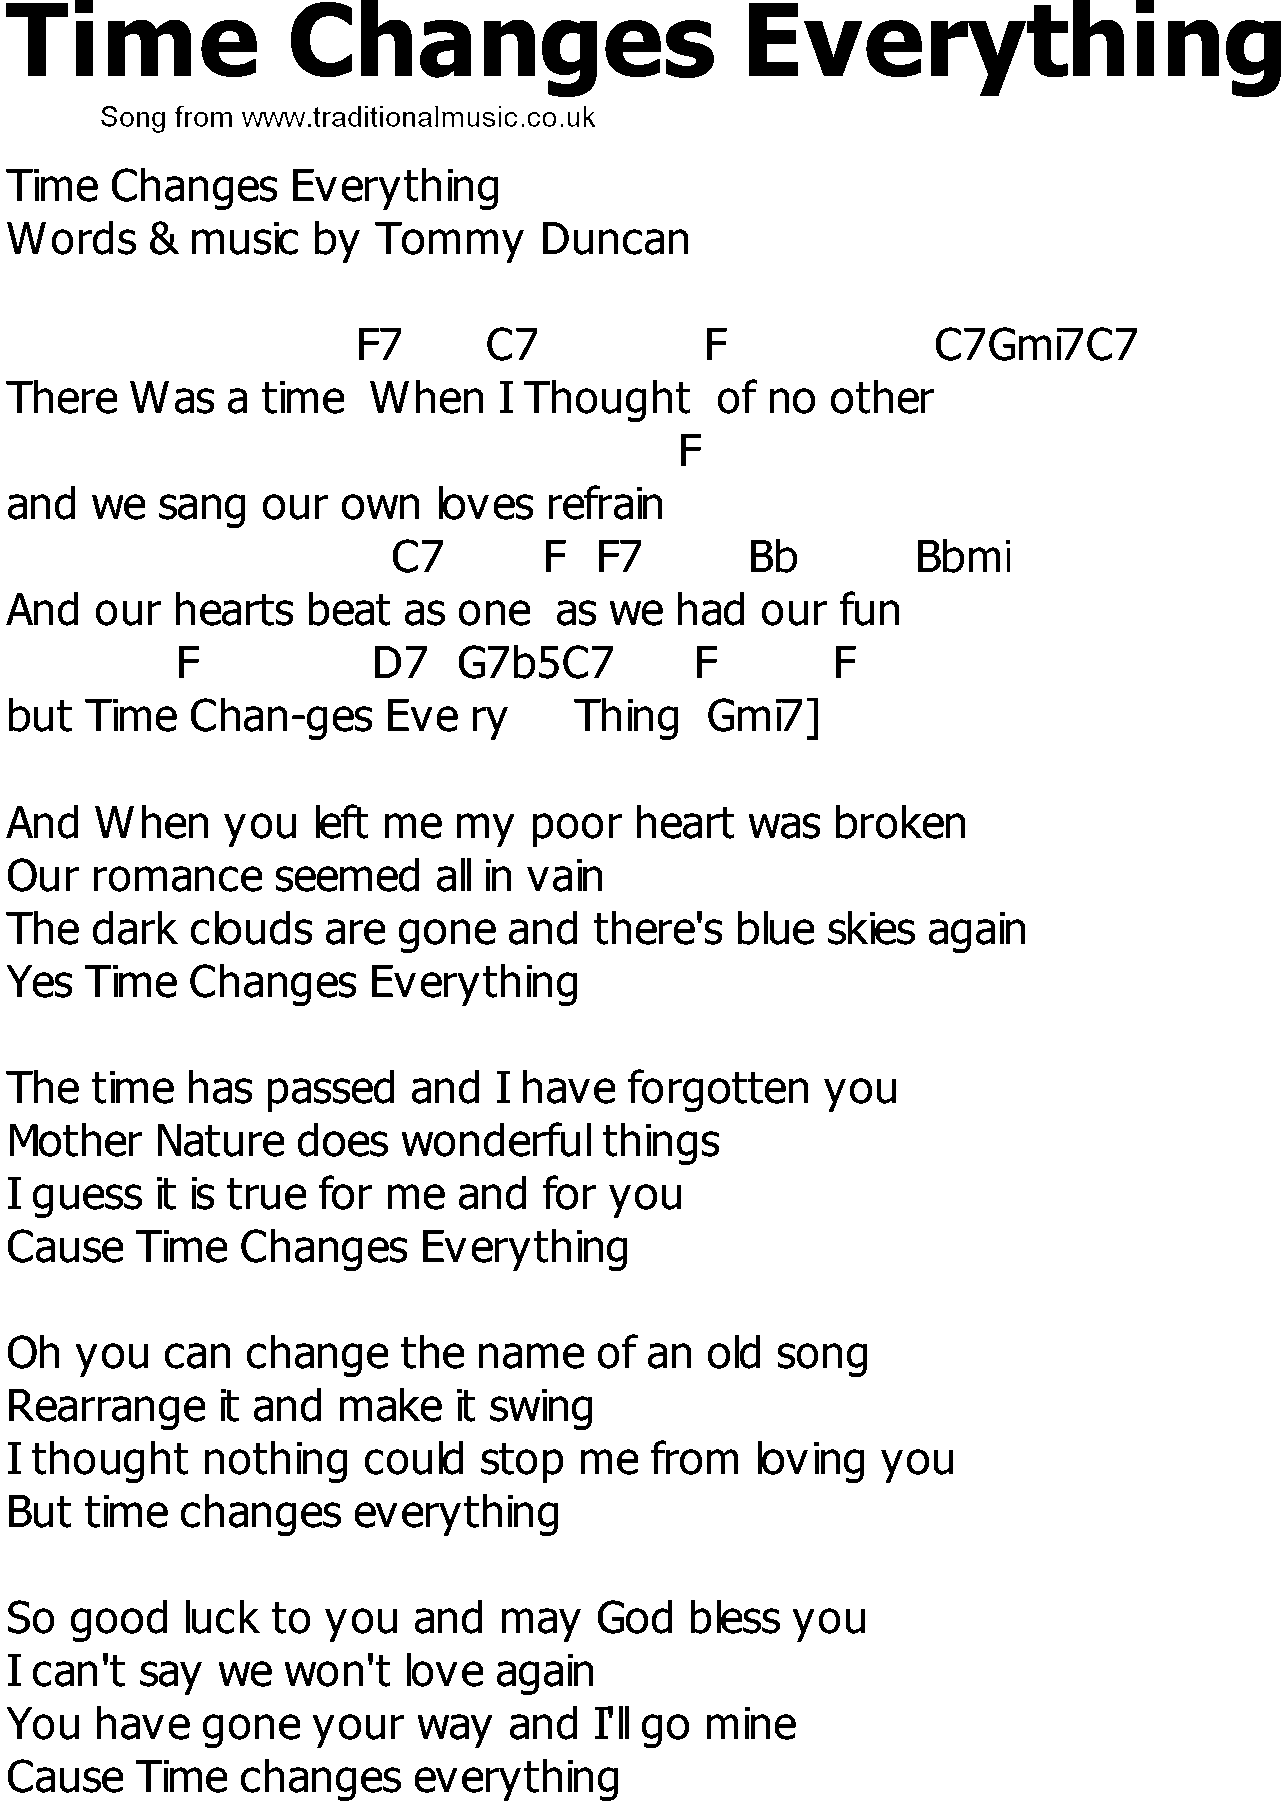 Old Country song lyrics with chords - Time Changes Everything